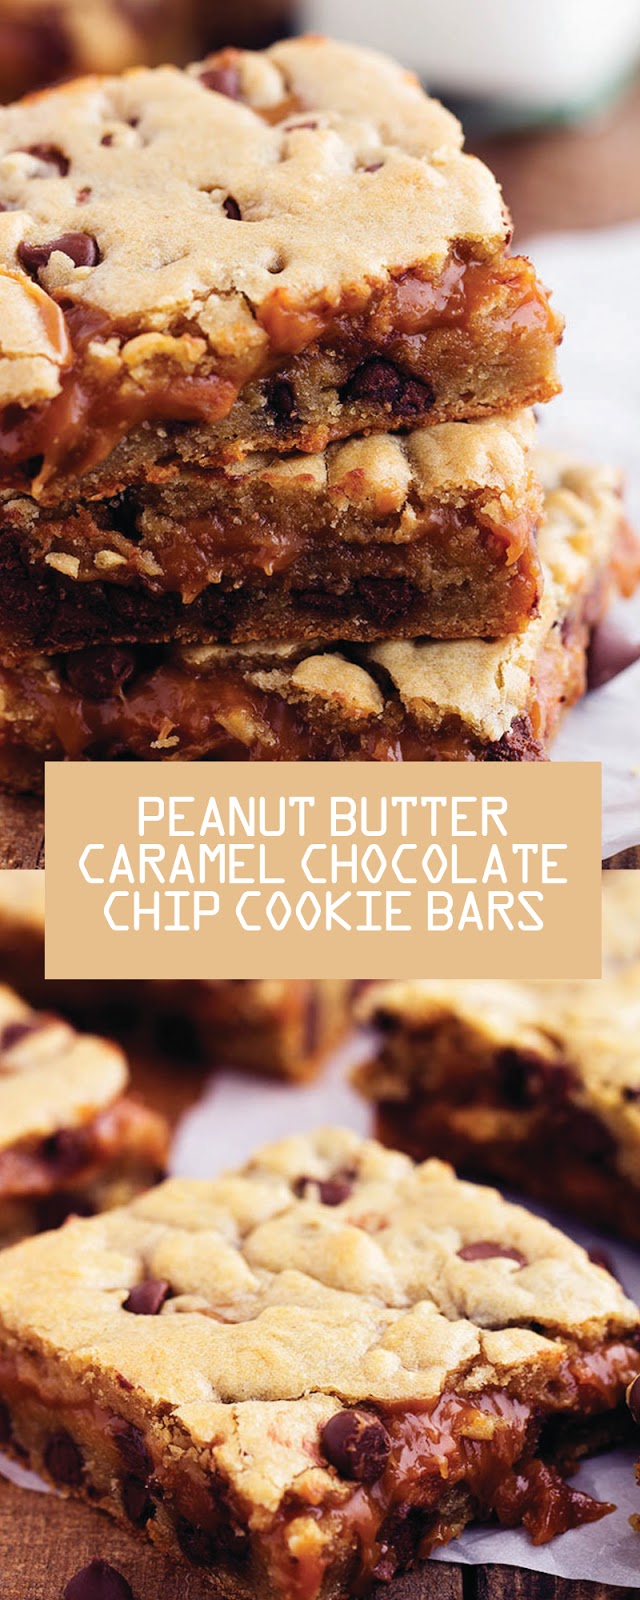 PEANUT BUTTER CARAMEL CHOCOLATE CHIP COOKIE BARS